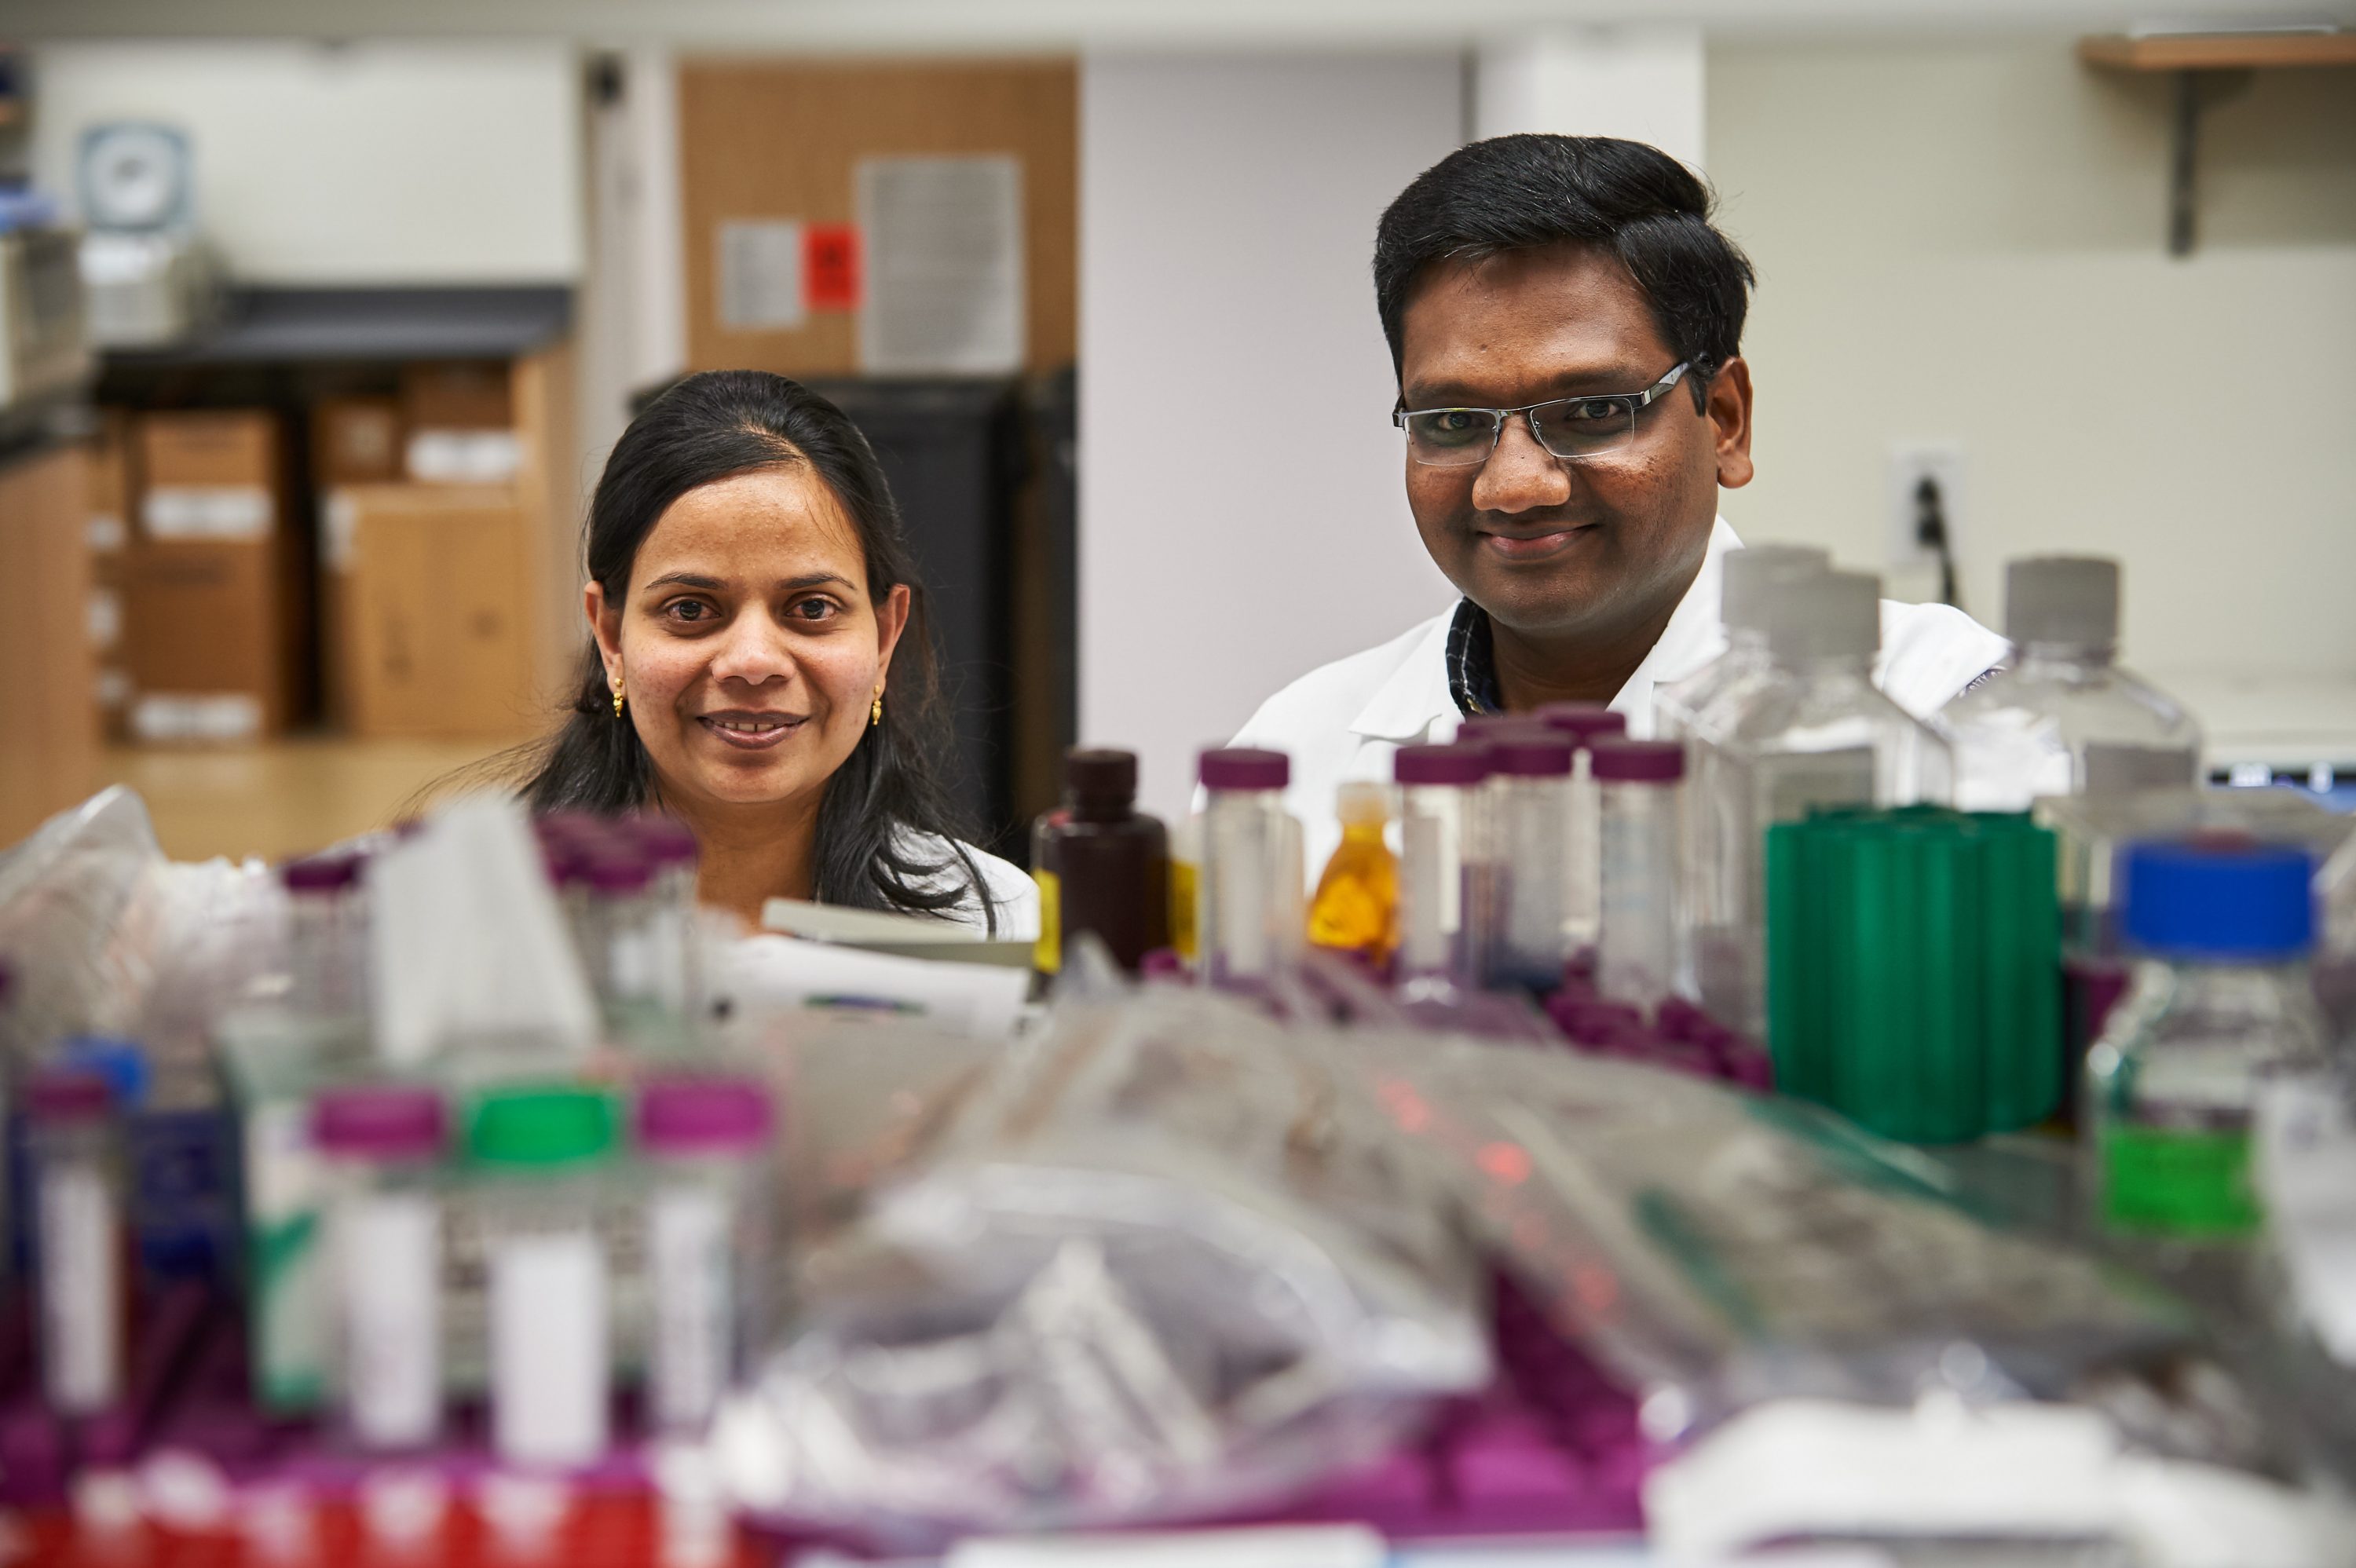 UConn Health researchers Sivapriya Kailasan Vanaja, left, and Vijay Rathinam find that sepsis – a deadly immune response – may stem from miscommunication among cells. (Peter Morenus/UConn Photo)